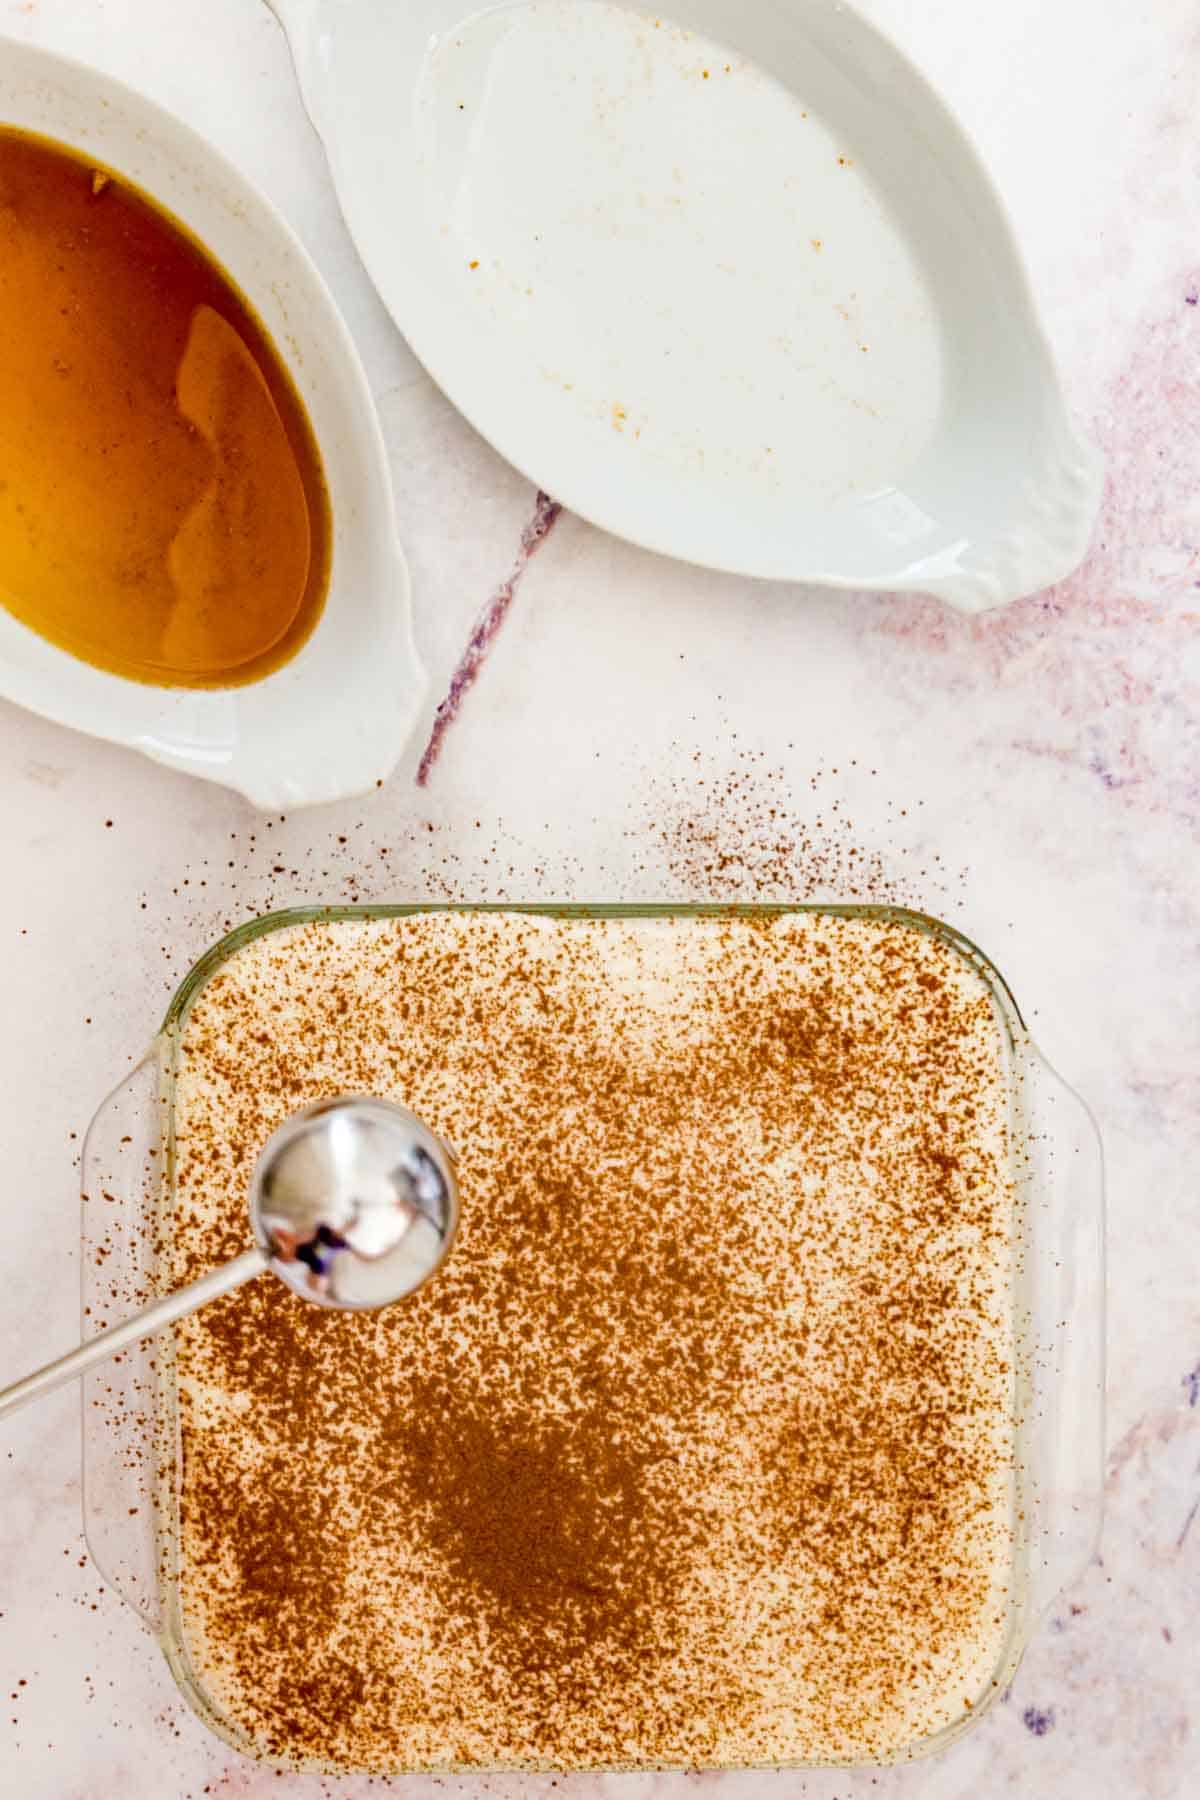 Cocoa powder is dusted over top of a finished tiramisu in a glass baking dish.